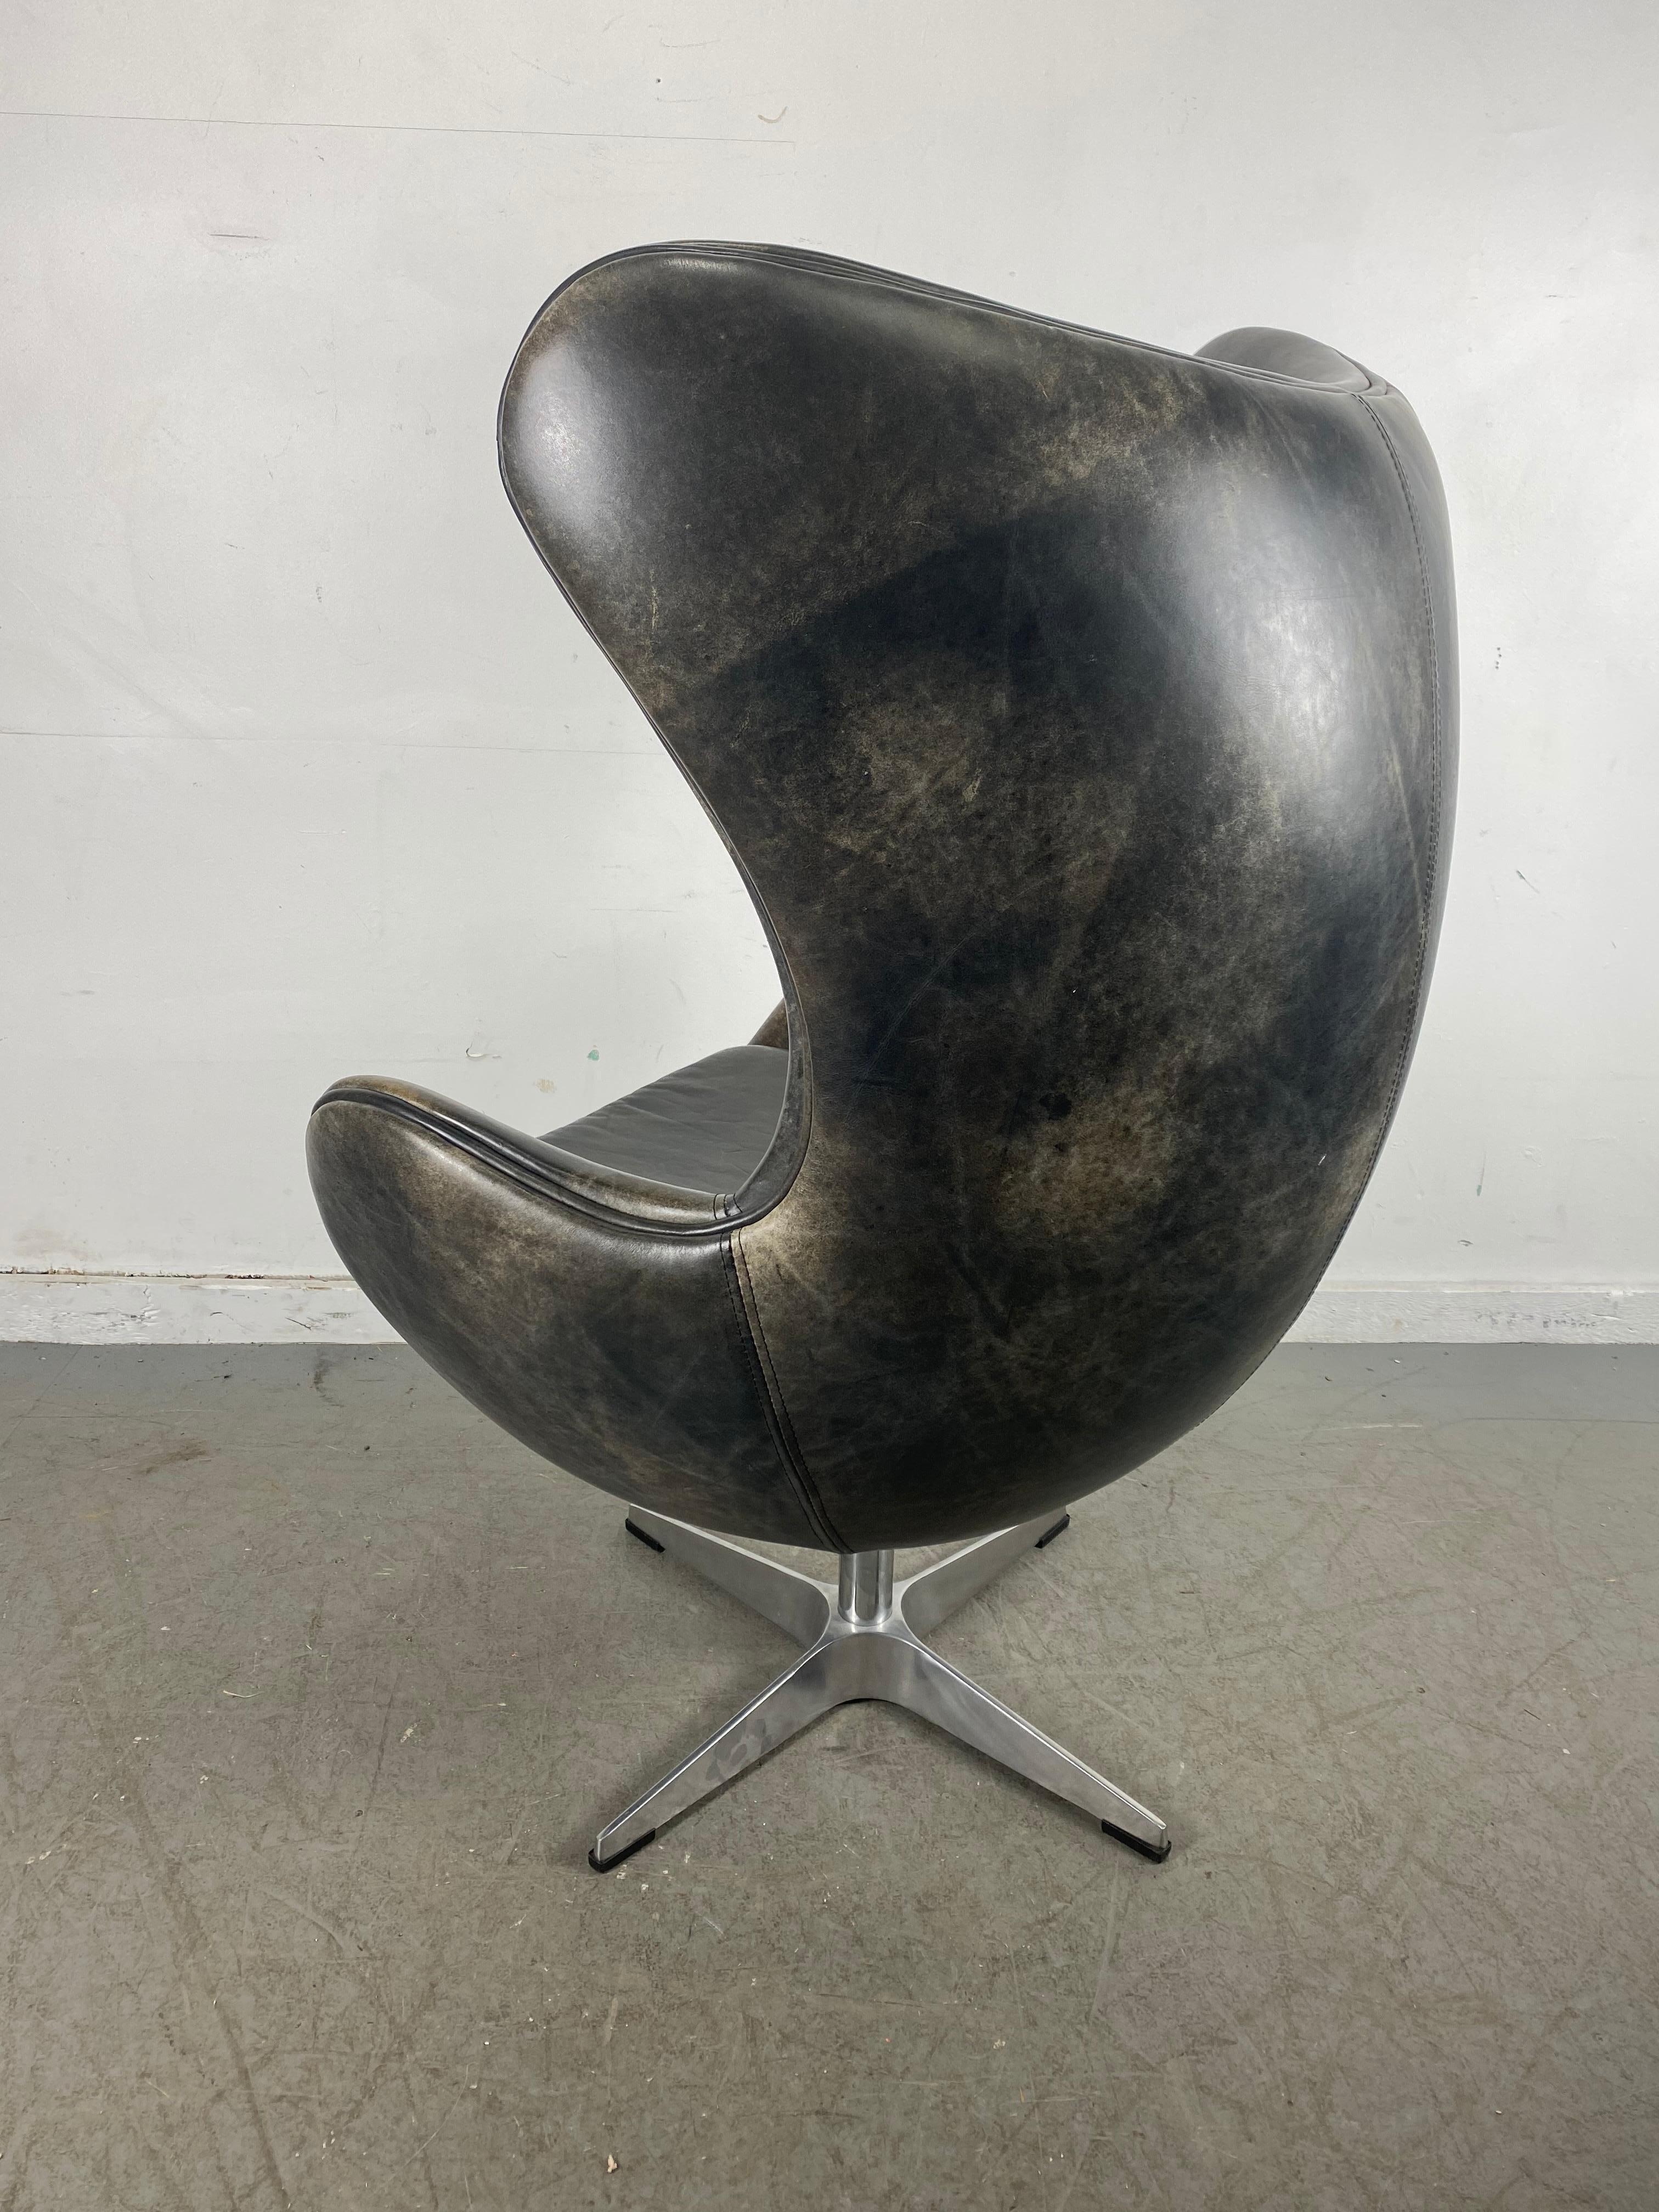 Classic modernist tilt/swivel egg chair in leather originally designed by Arne Jacobsen. c.1980s. Manufacturer unknown. Beautiful chair, modern icon! Nice original condition. Marbleized black/brown distressed leather upholstery. Really nice quality